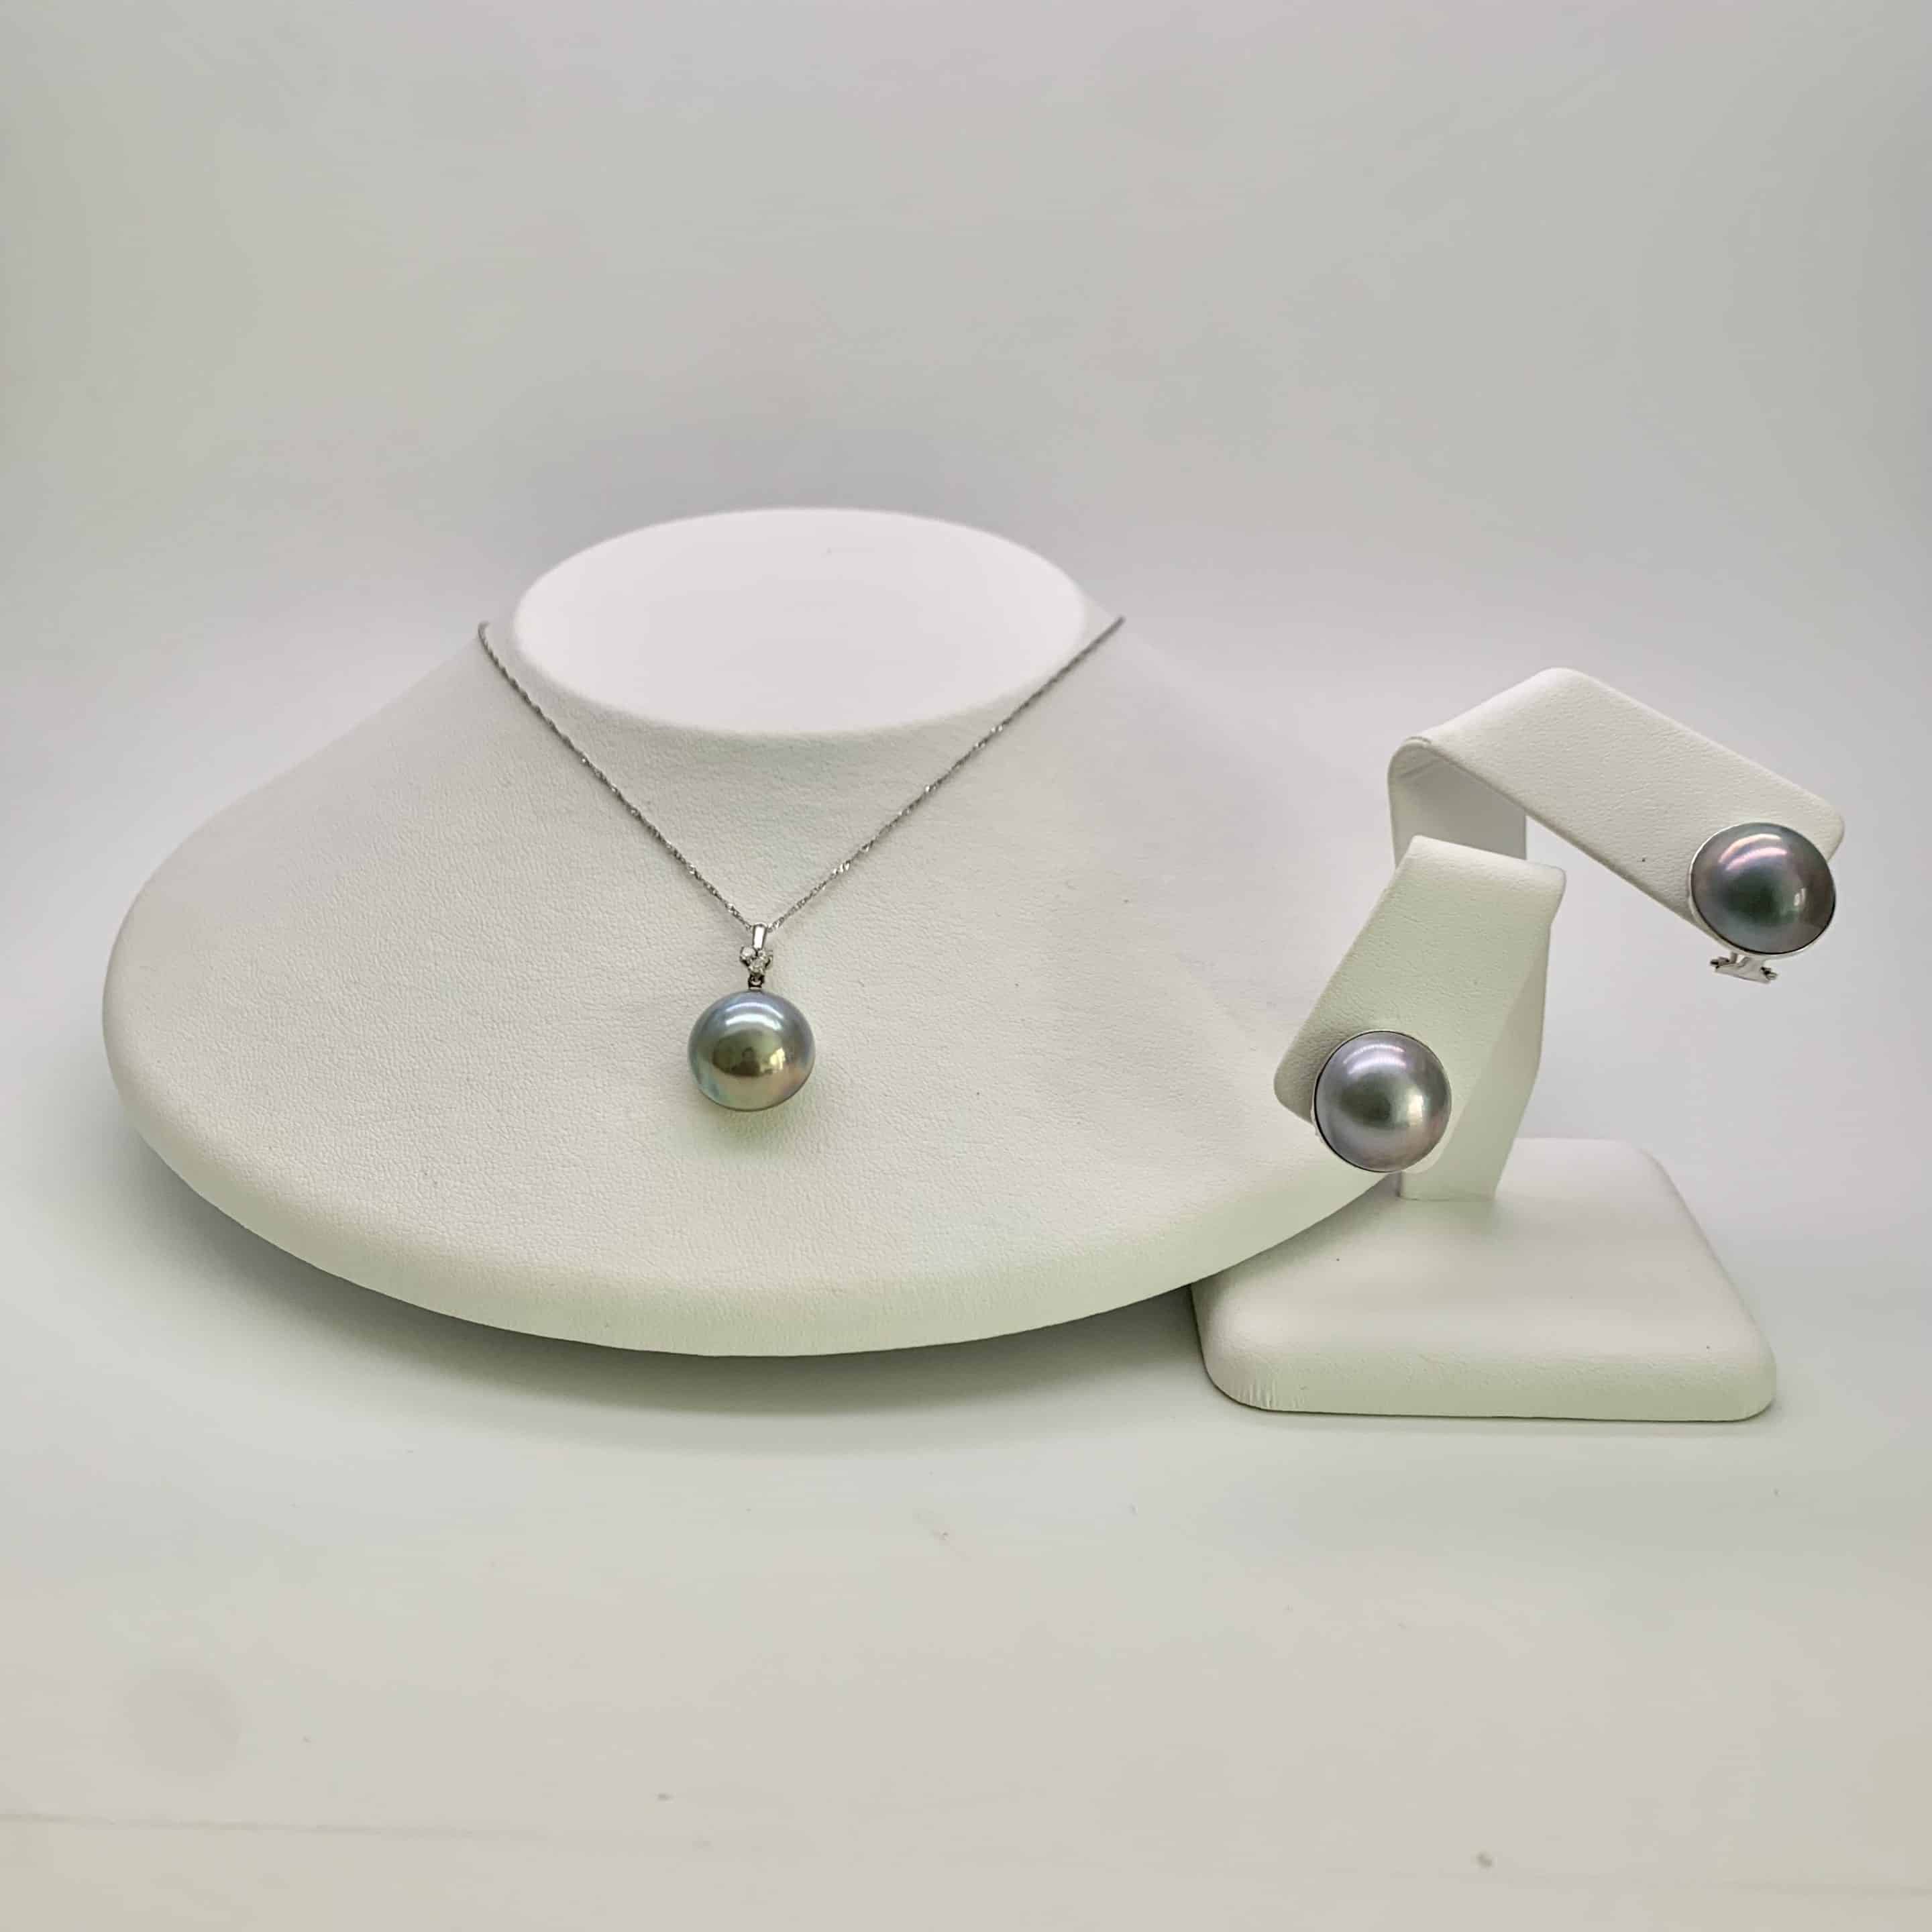 Mabe Pendant & Clip Earrings $2500 - Luxury Pearl Jewelry Design